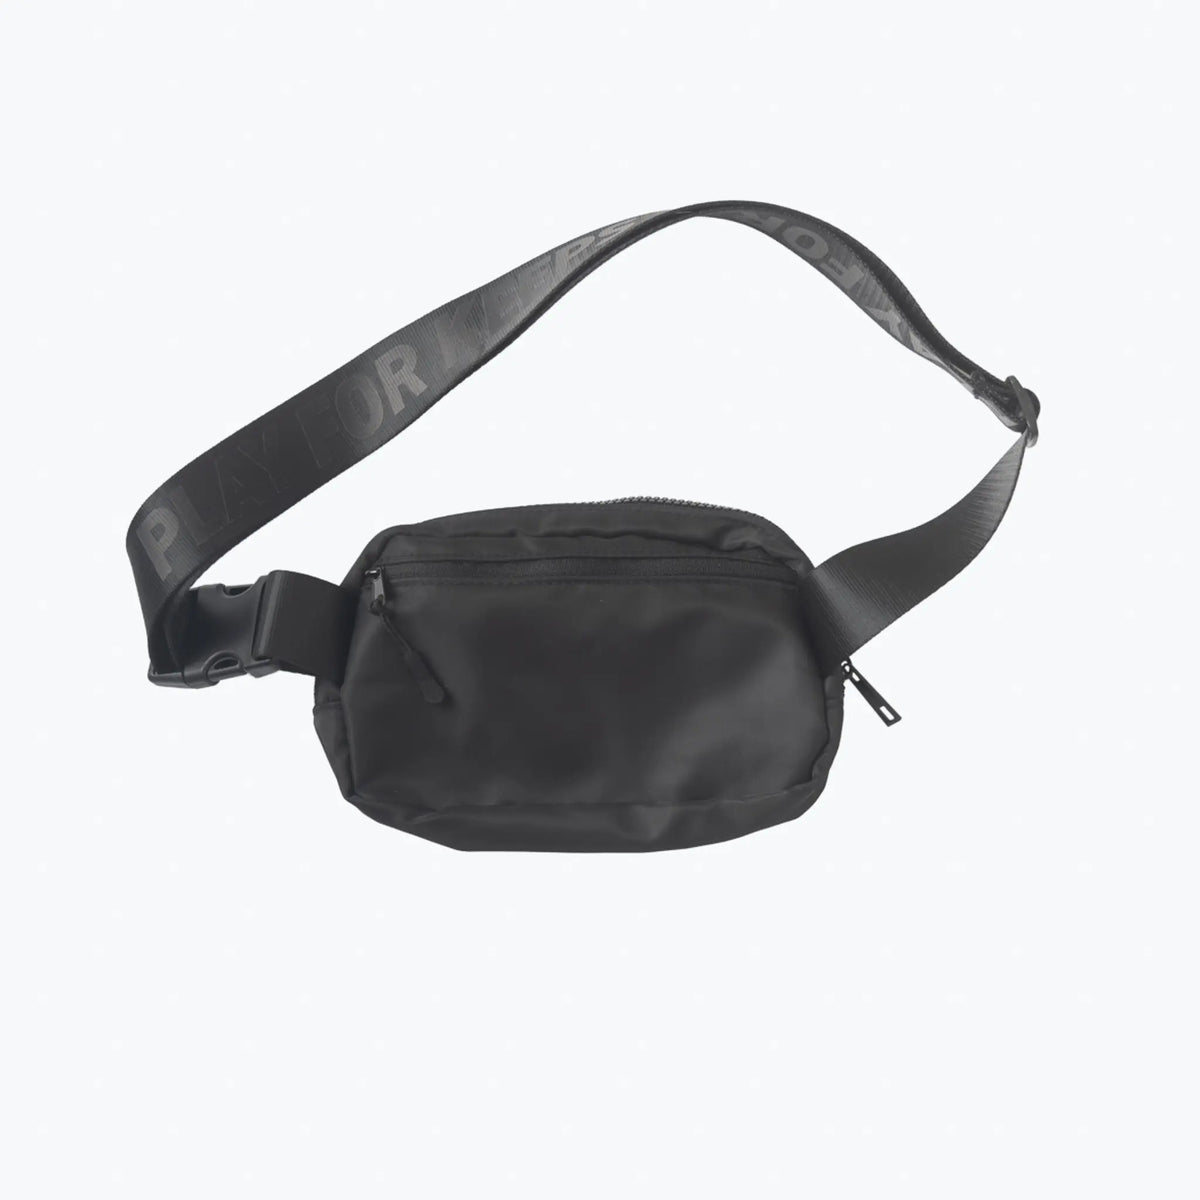 This image displays a black crossbody day bag from Tater Baseball, featuring a sleek design with the brand&#39;s logo on the strap, conveying a stylish and practical accessory for everyday use.